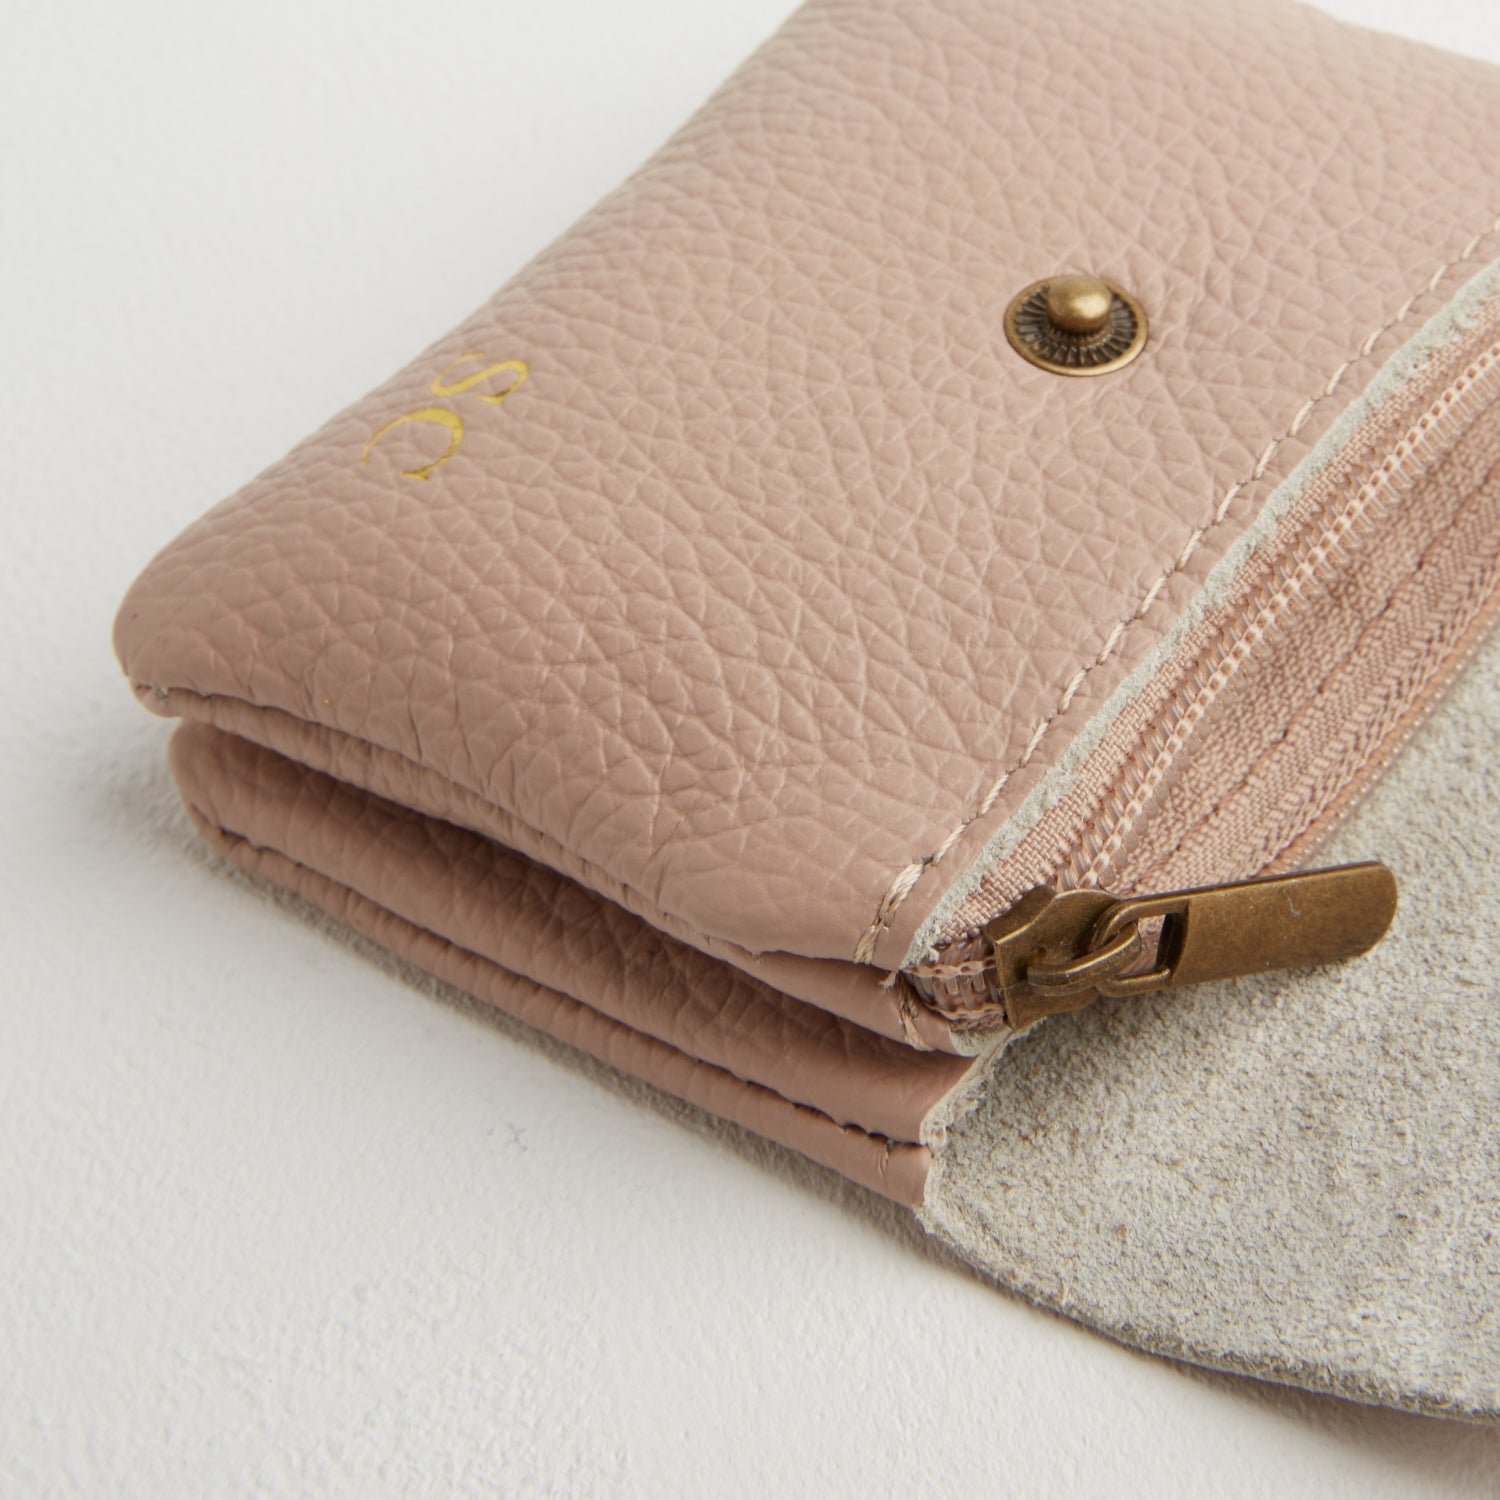 Luca Small Crossbody Bag, Purse and Scarf Gift Set in Blush Pink